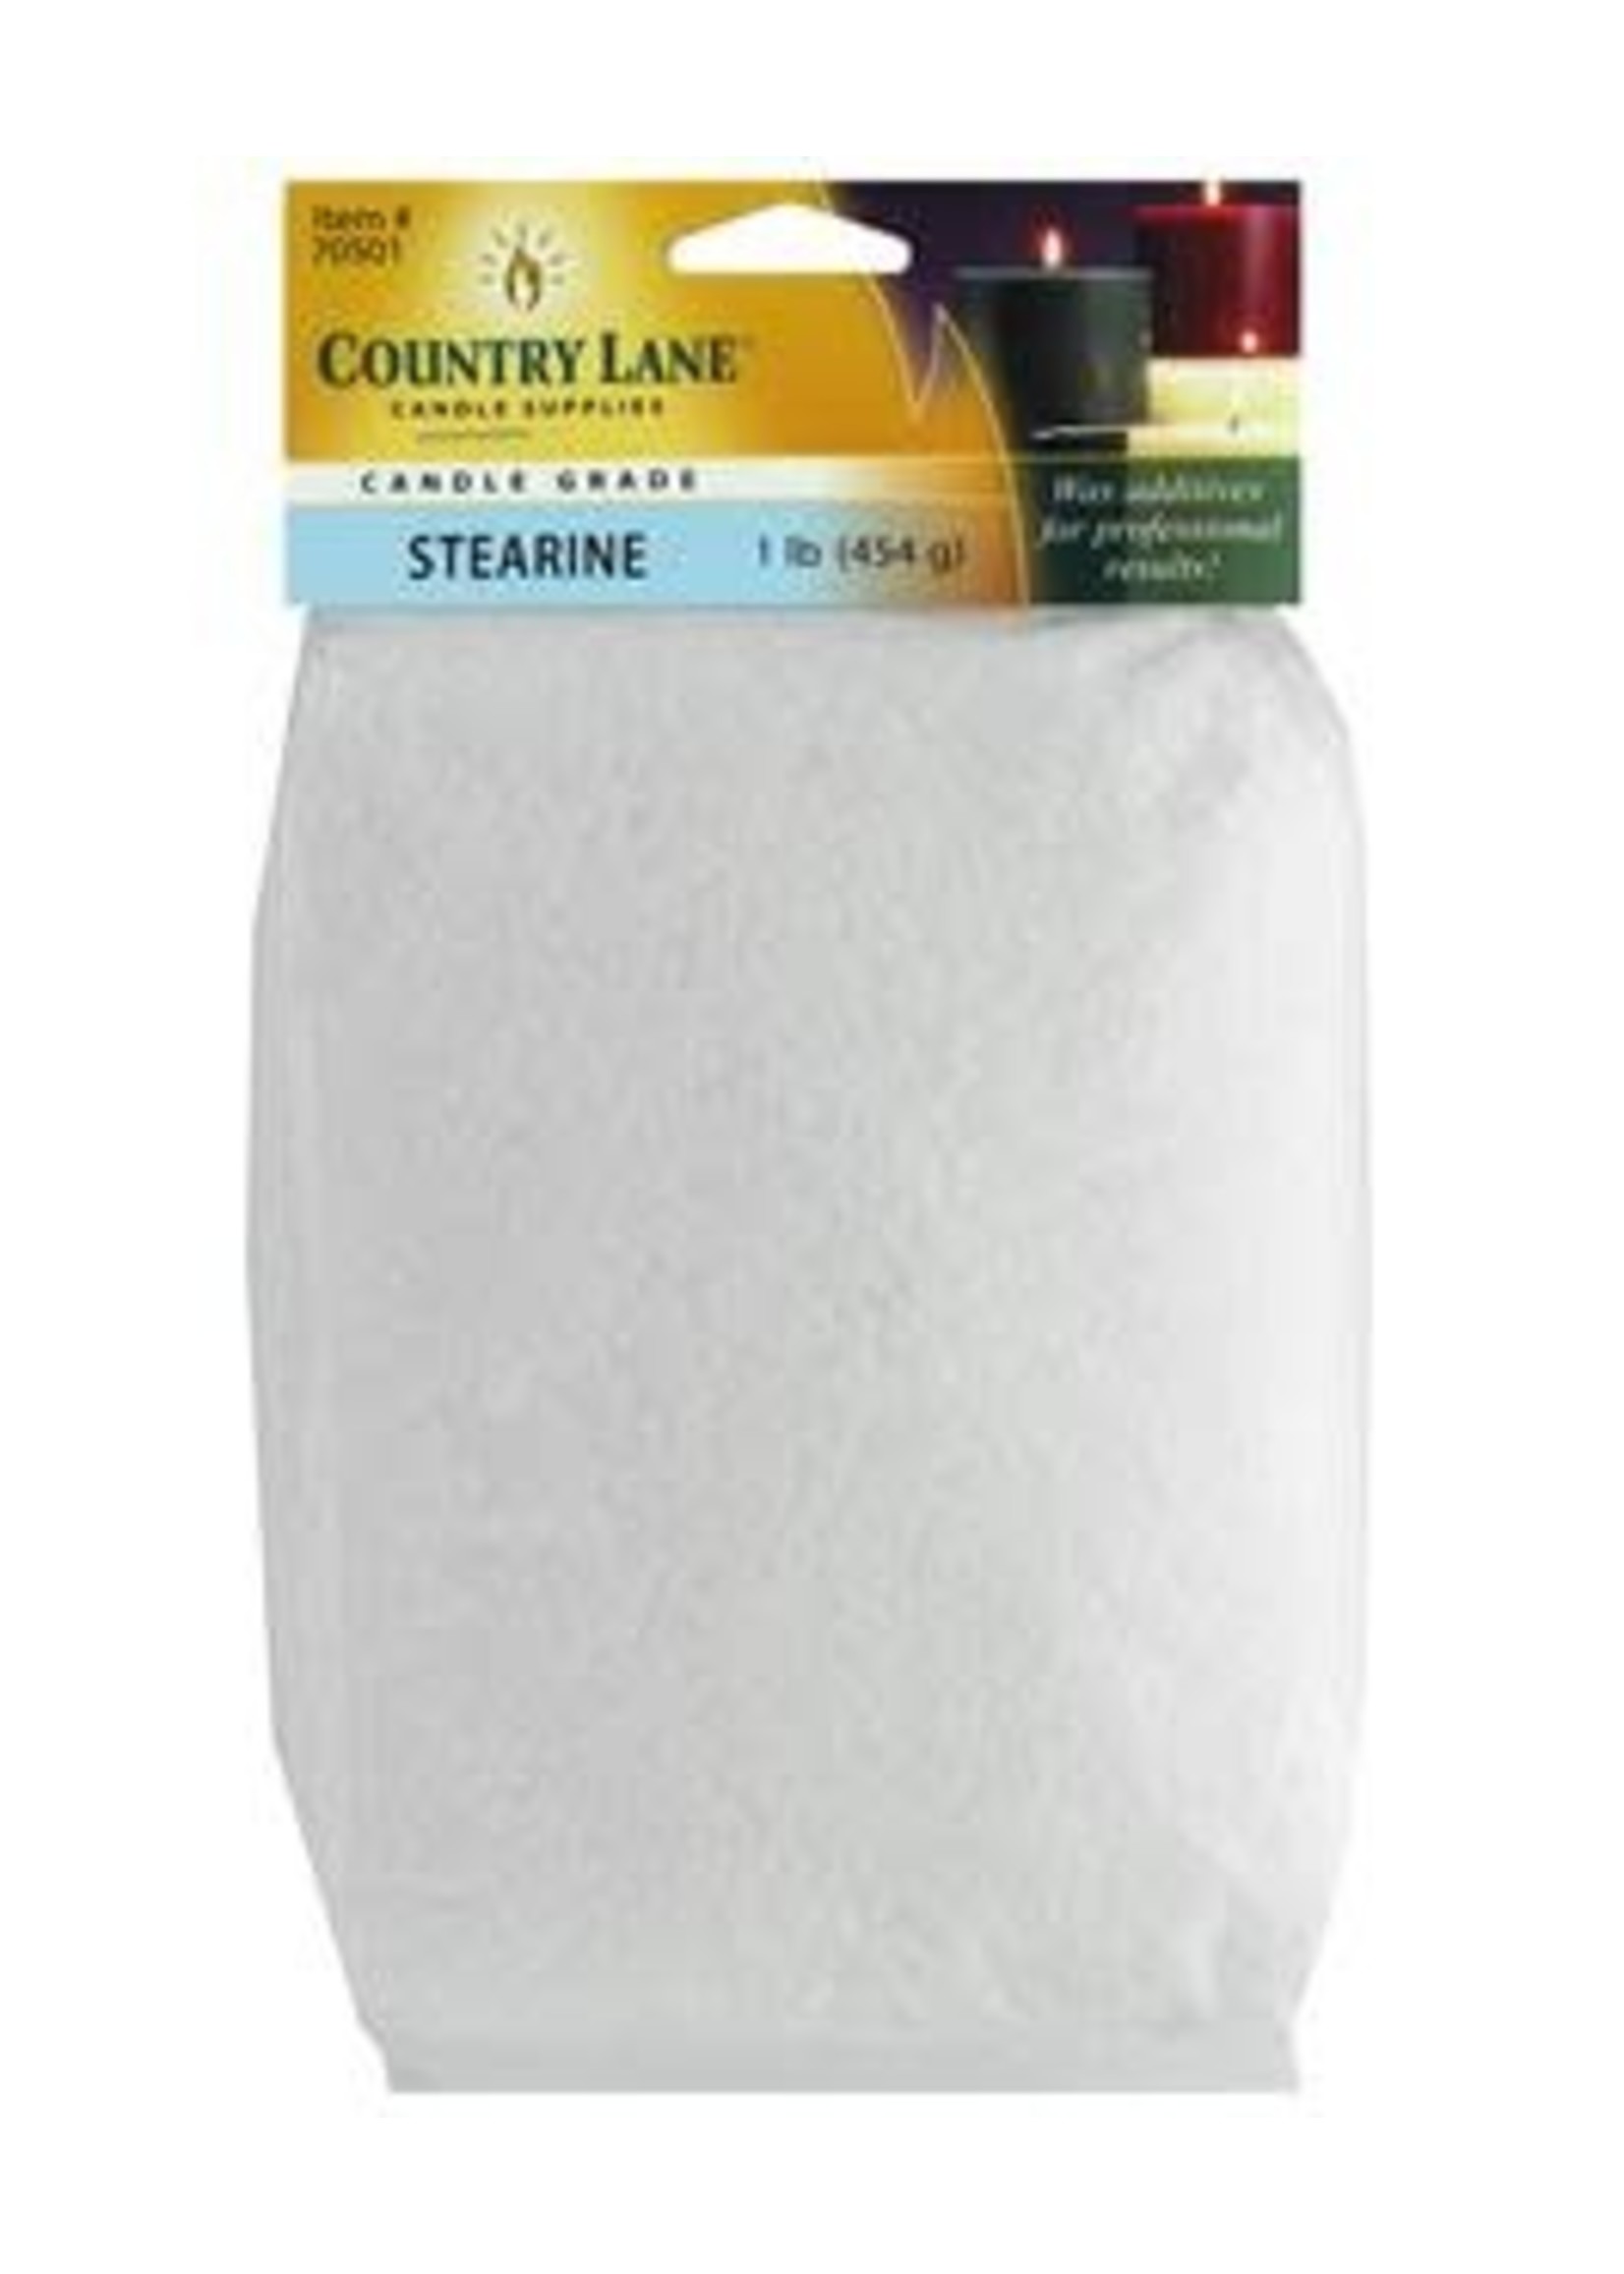 Country Lane Candle Additives Stearine Bag 1lb